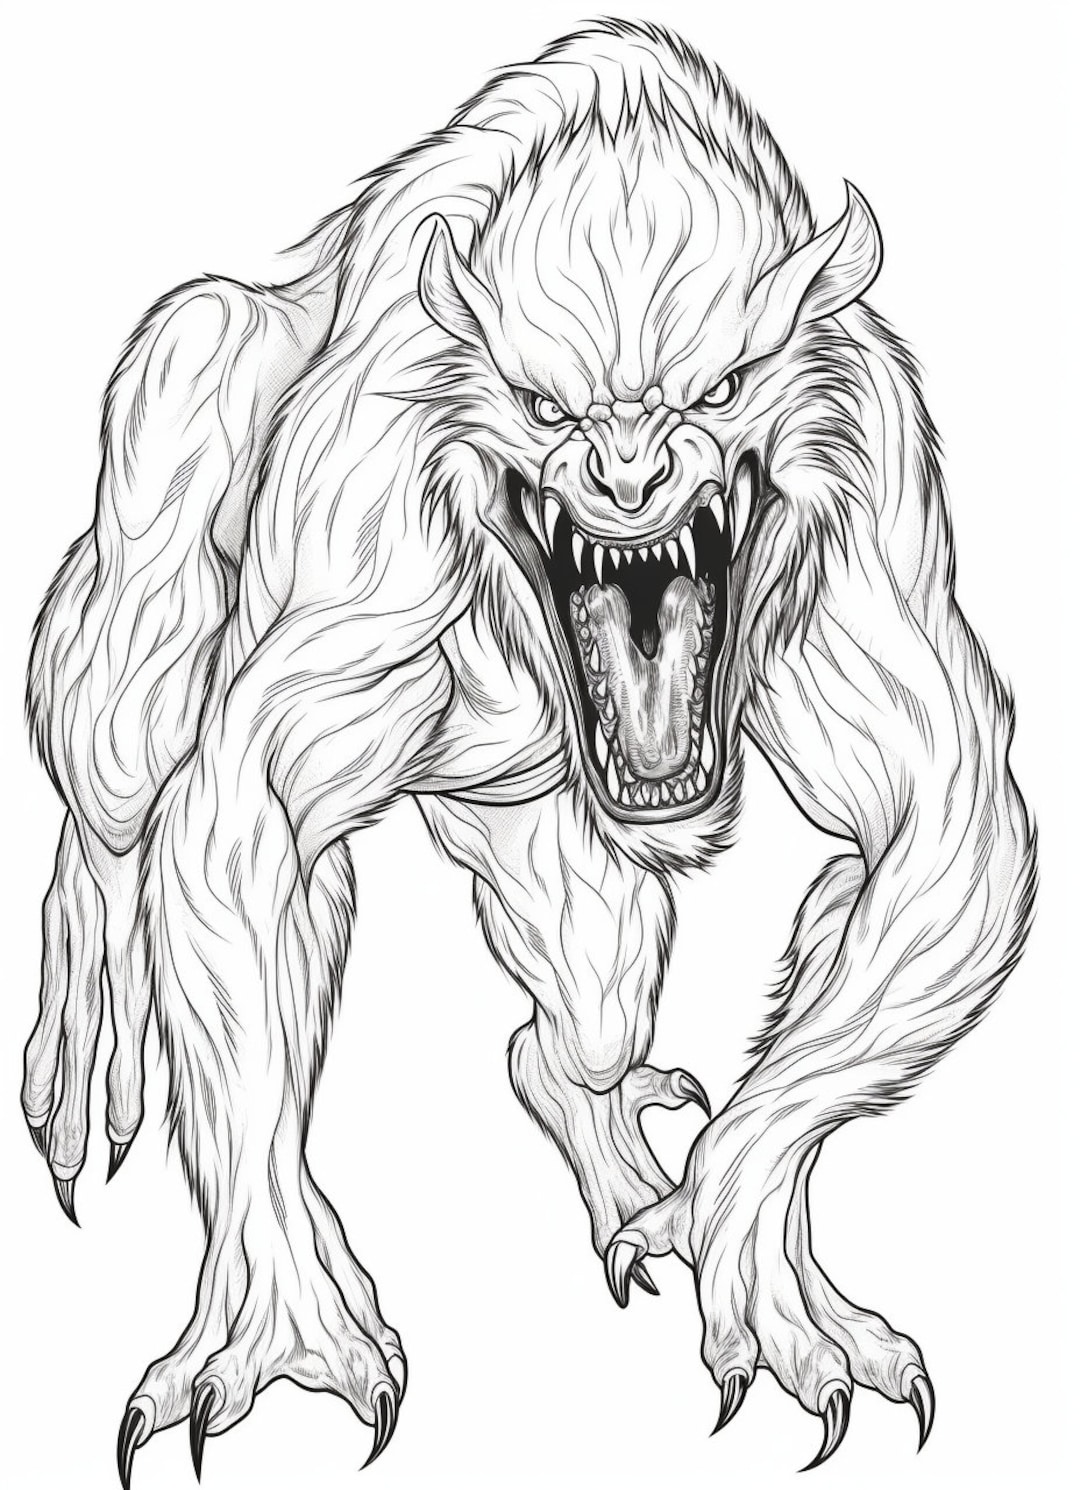 Halloween scary werewolf coloring book page image for adults black and white line drawing image buy once and print hundreds download now